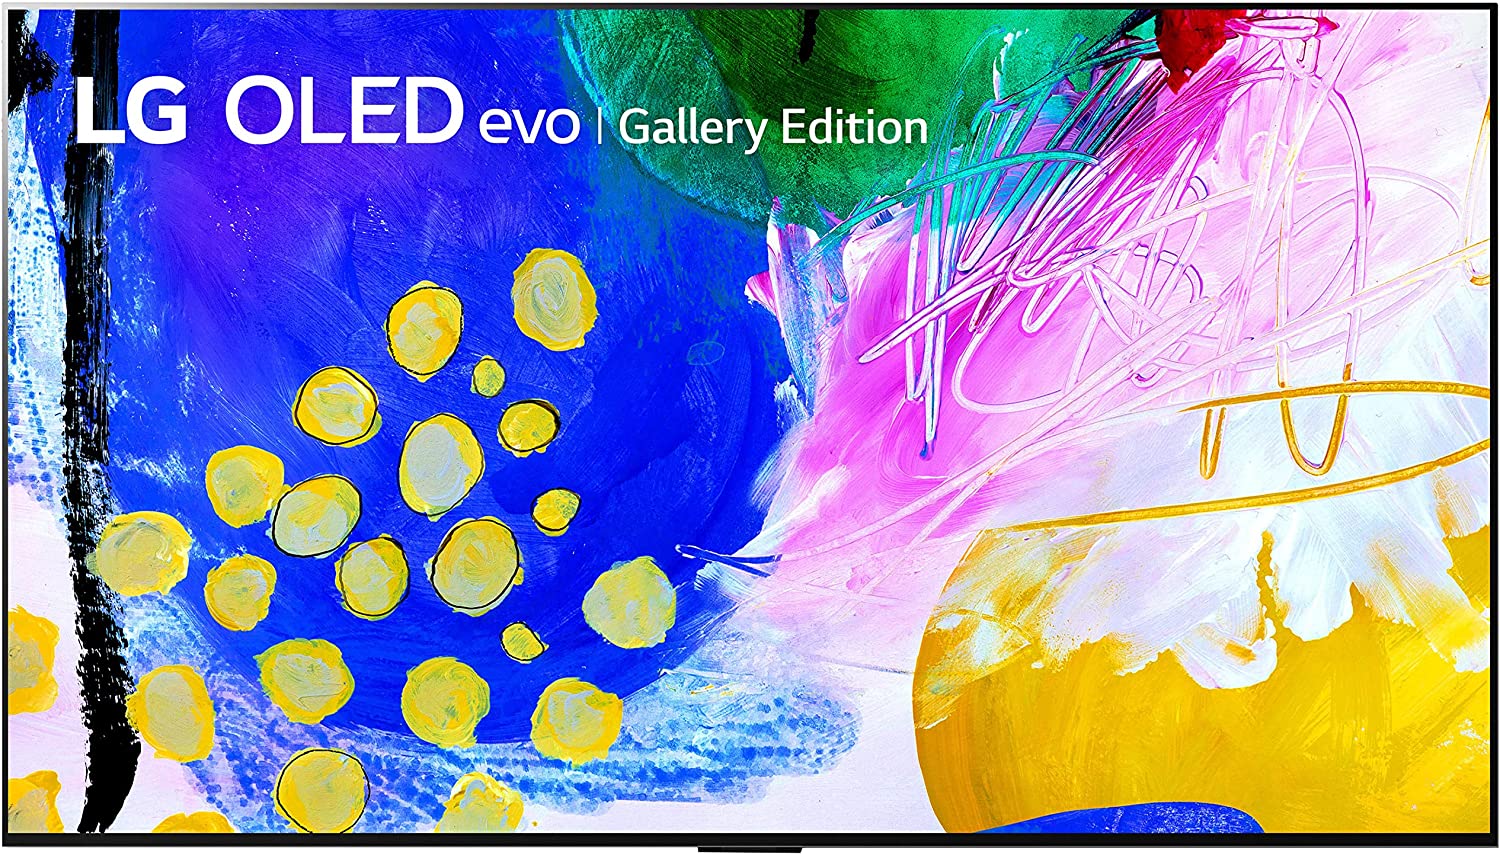 LG G2 Gallery OLED TV displaying colorful artwork